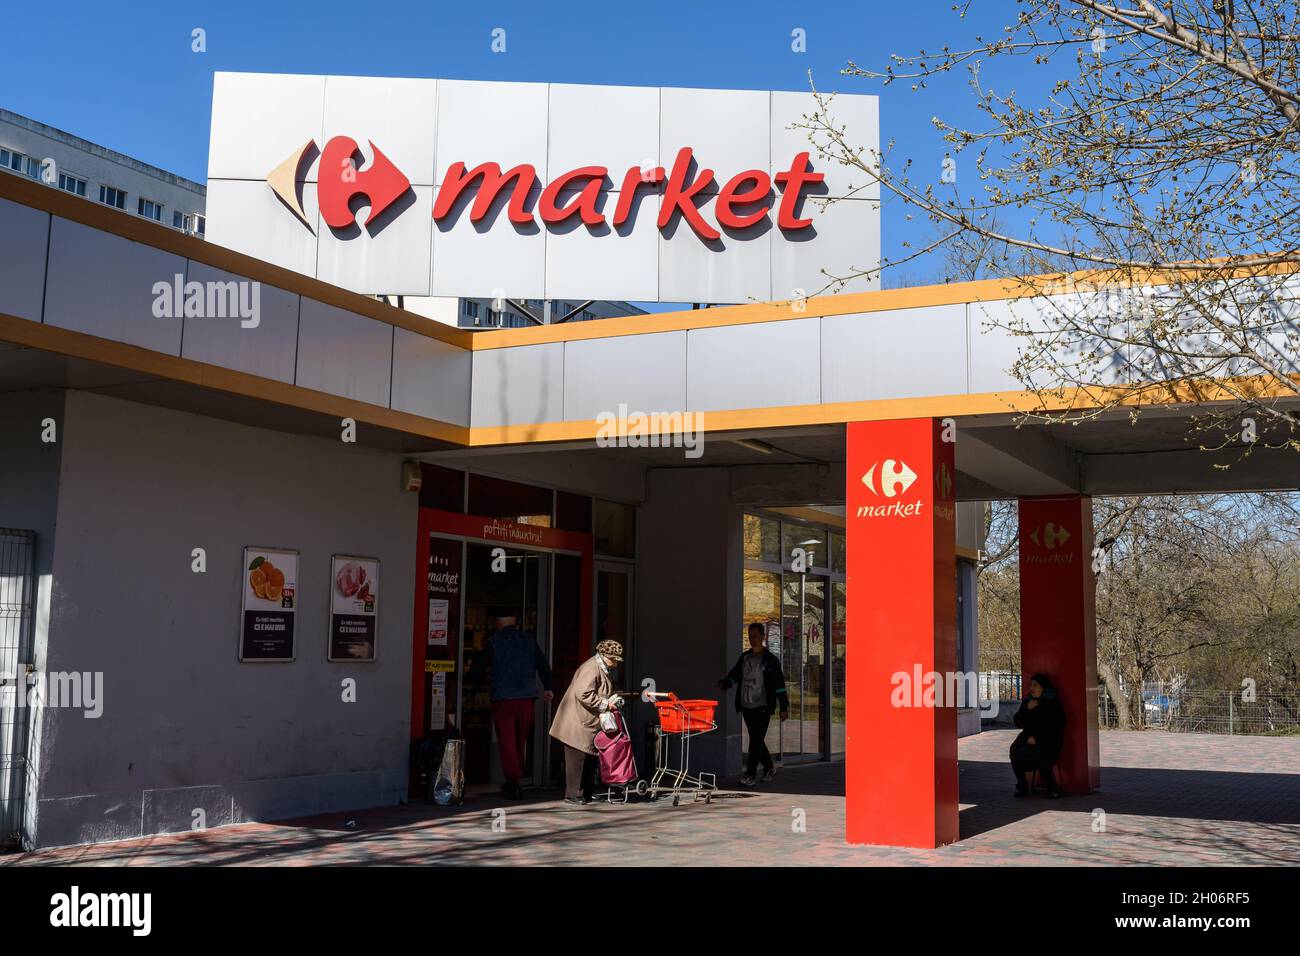 Bucharest, Romania, 10 March 2019 - Sign with logo of Carrefour market supermarket at the entry of a store in Bucharest Stock Photo